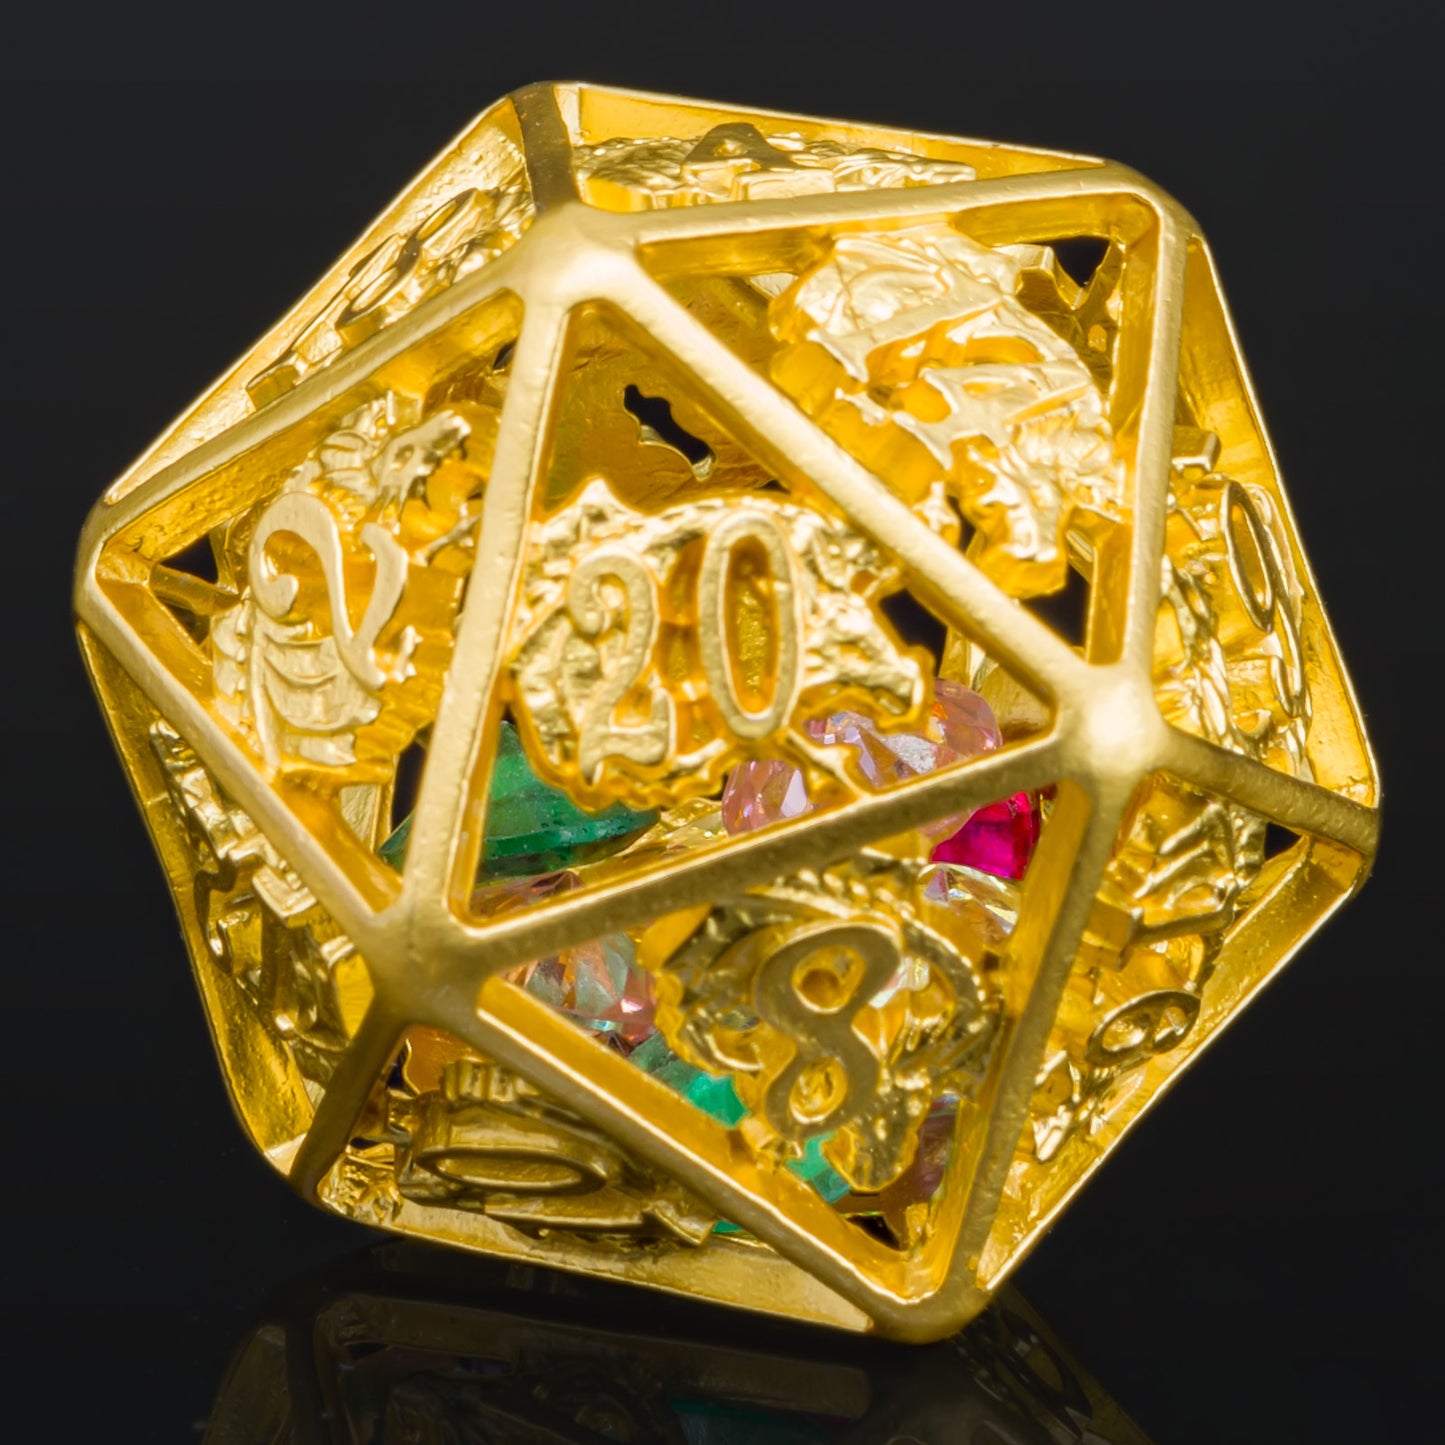 Hollow Dragon D20 filled with Gems